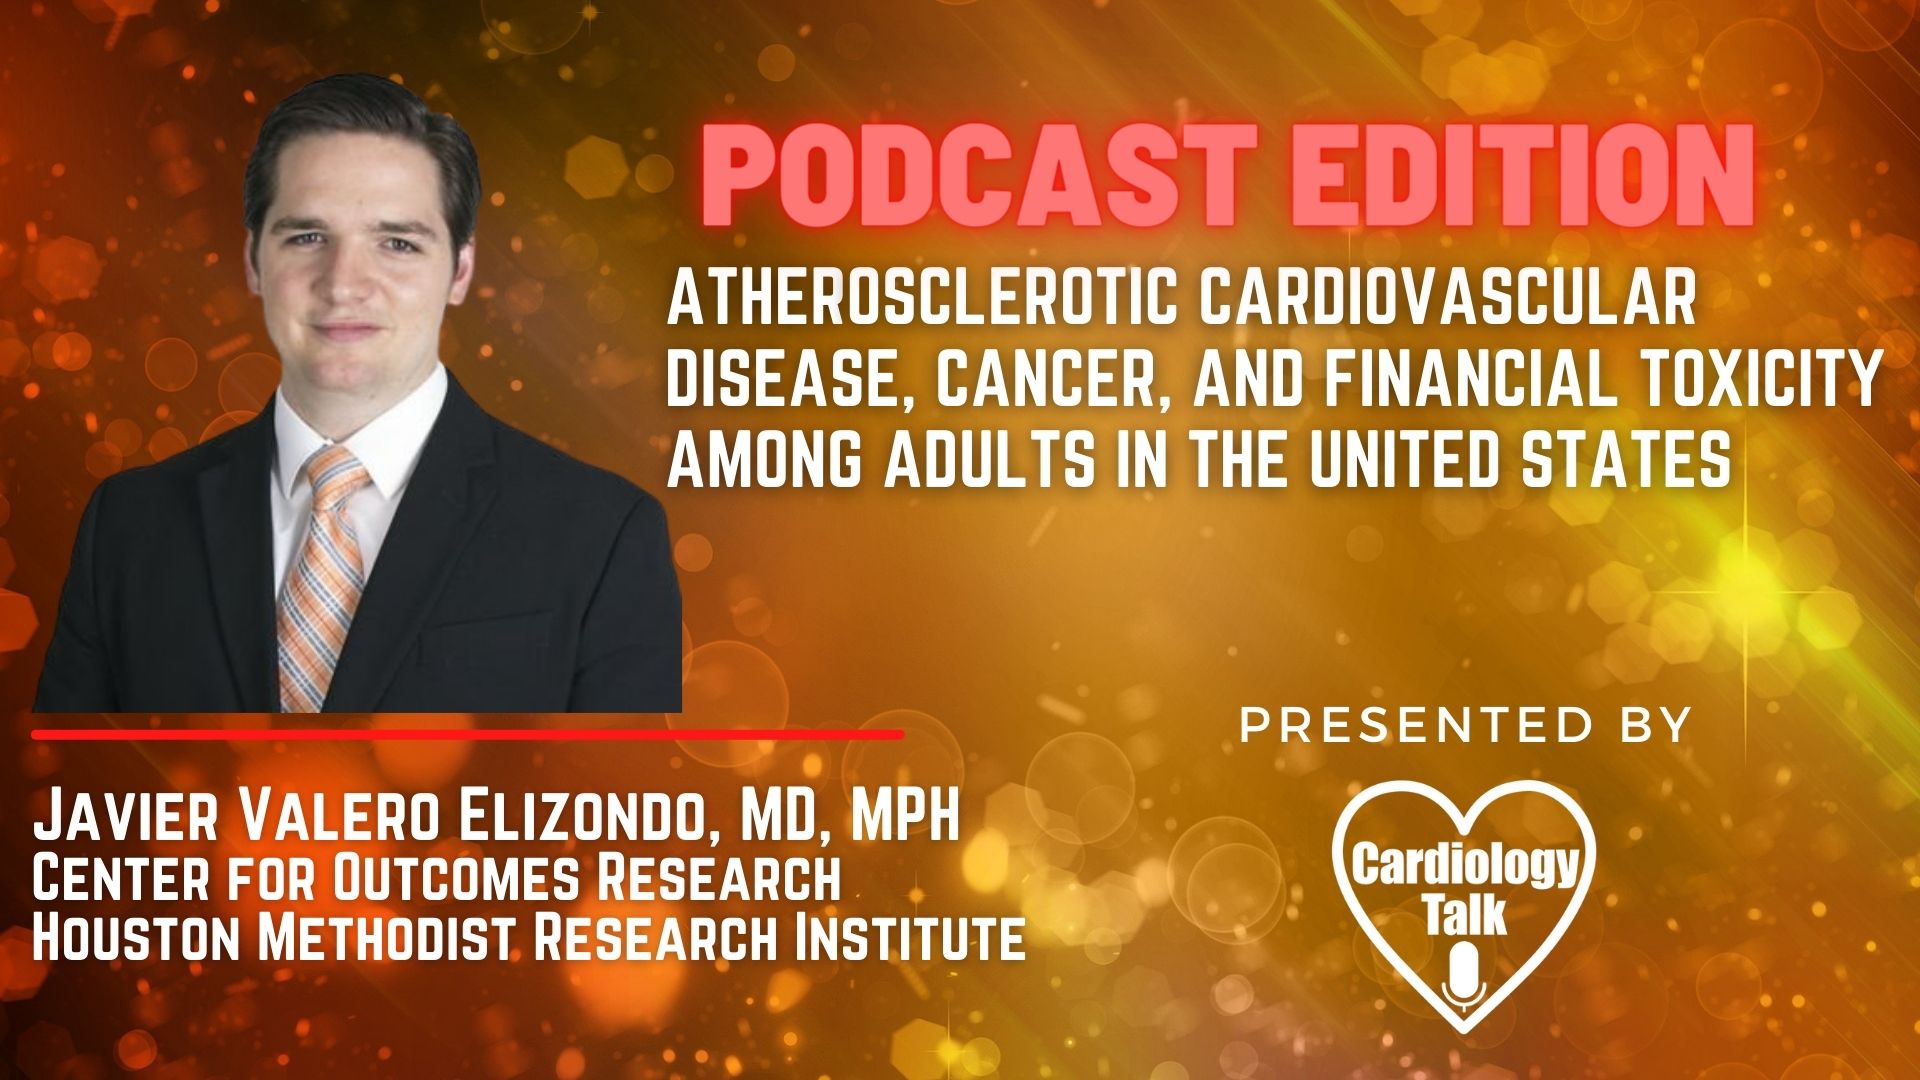 Podcast- Javier Valero Elizondo, MD, MPH- Atherosclerotic Cardiovascular Disease, Cancer, and Financial Toxicity Among Adults in the United States @jvaleromd  #HoustonMethodistResearchIns...